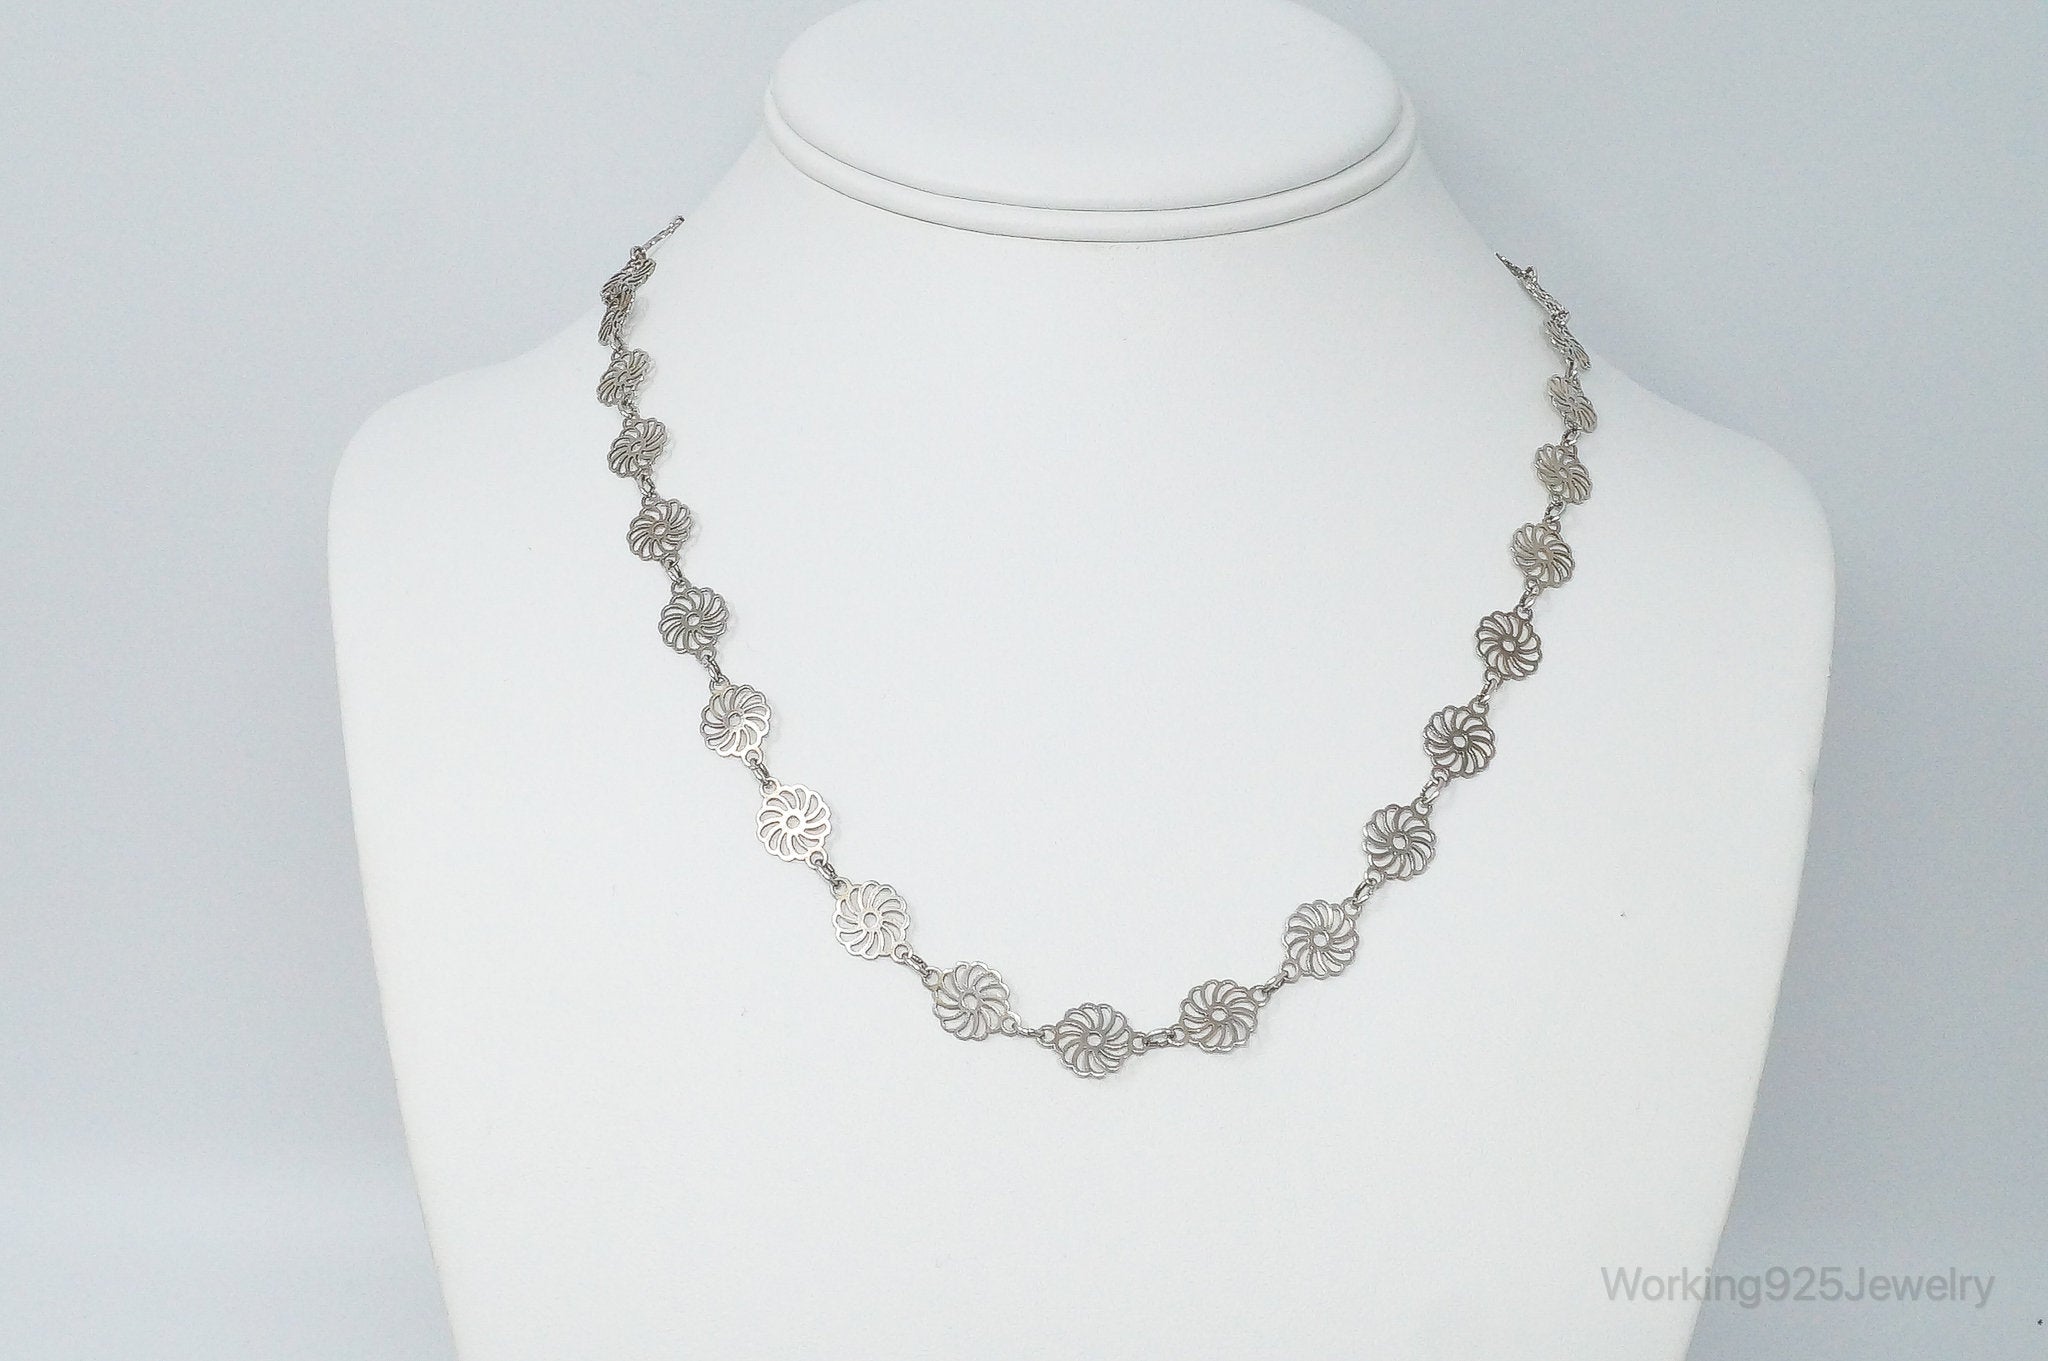 Antique Flowers Pattern Sterling Silver Necklace